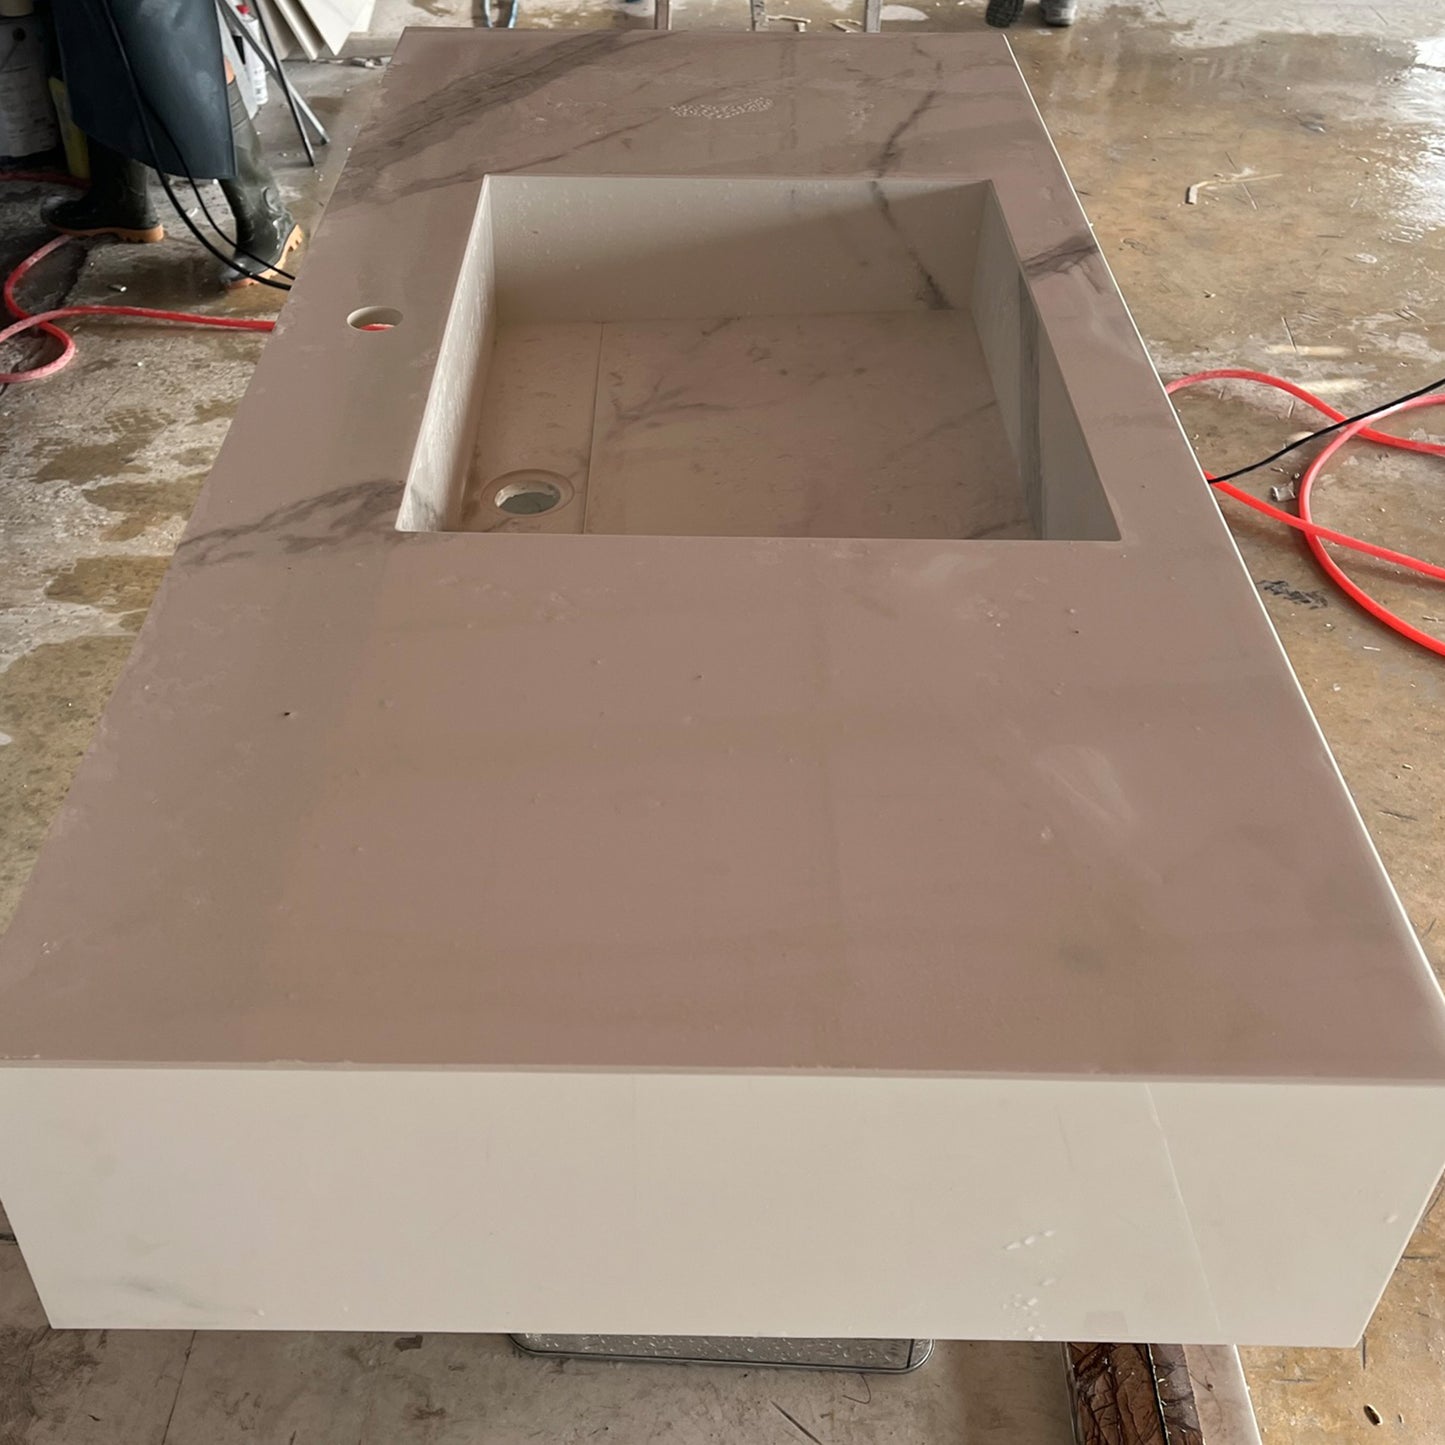 HANDCRAFTED EXTRA STATUARIO HIGH ENGINEERED PORCELAIN SINK